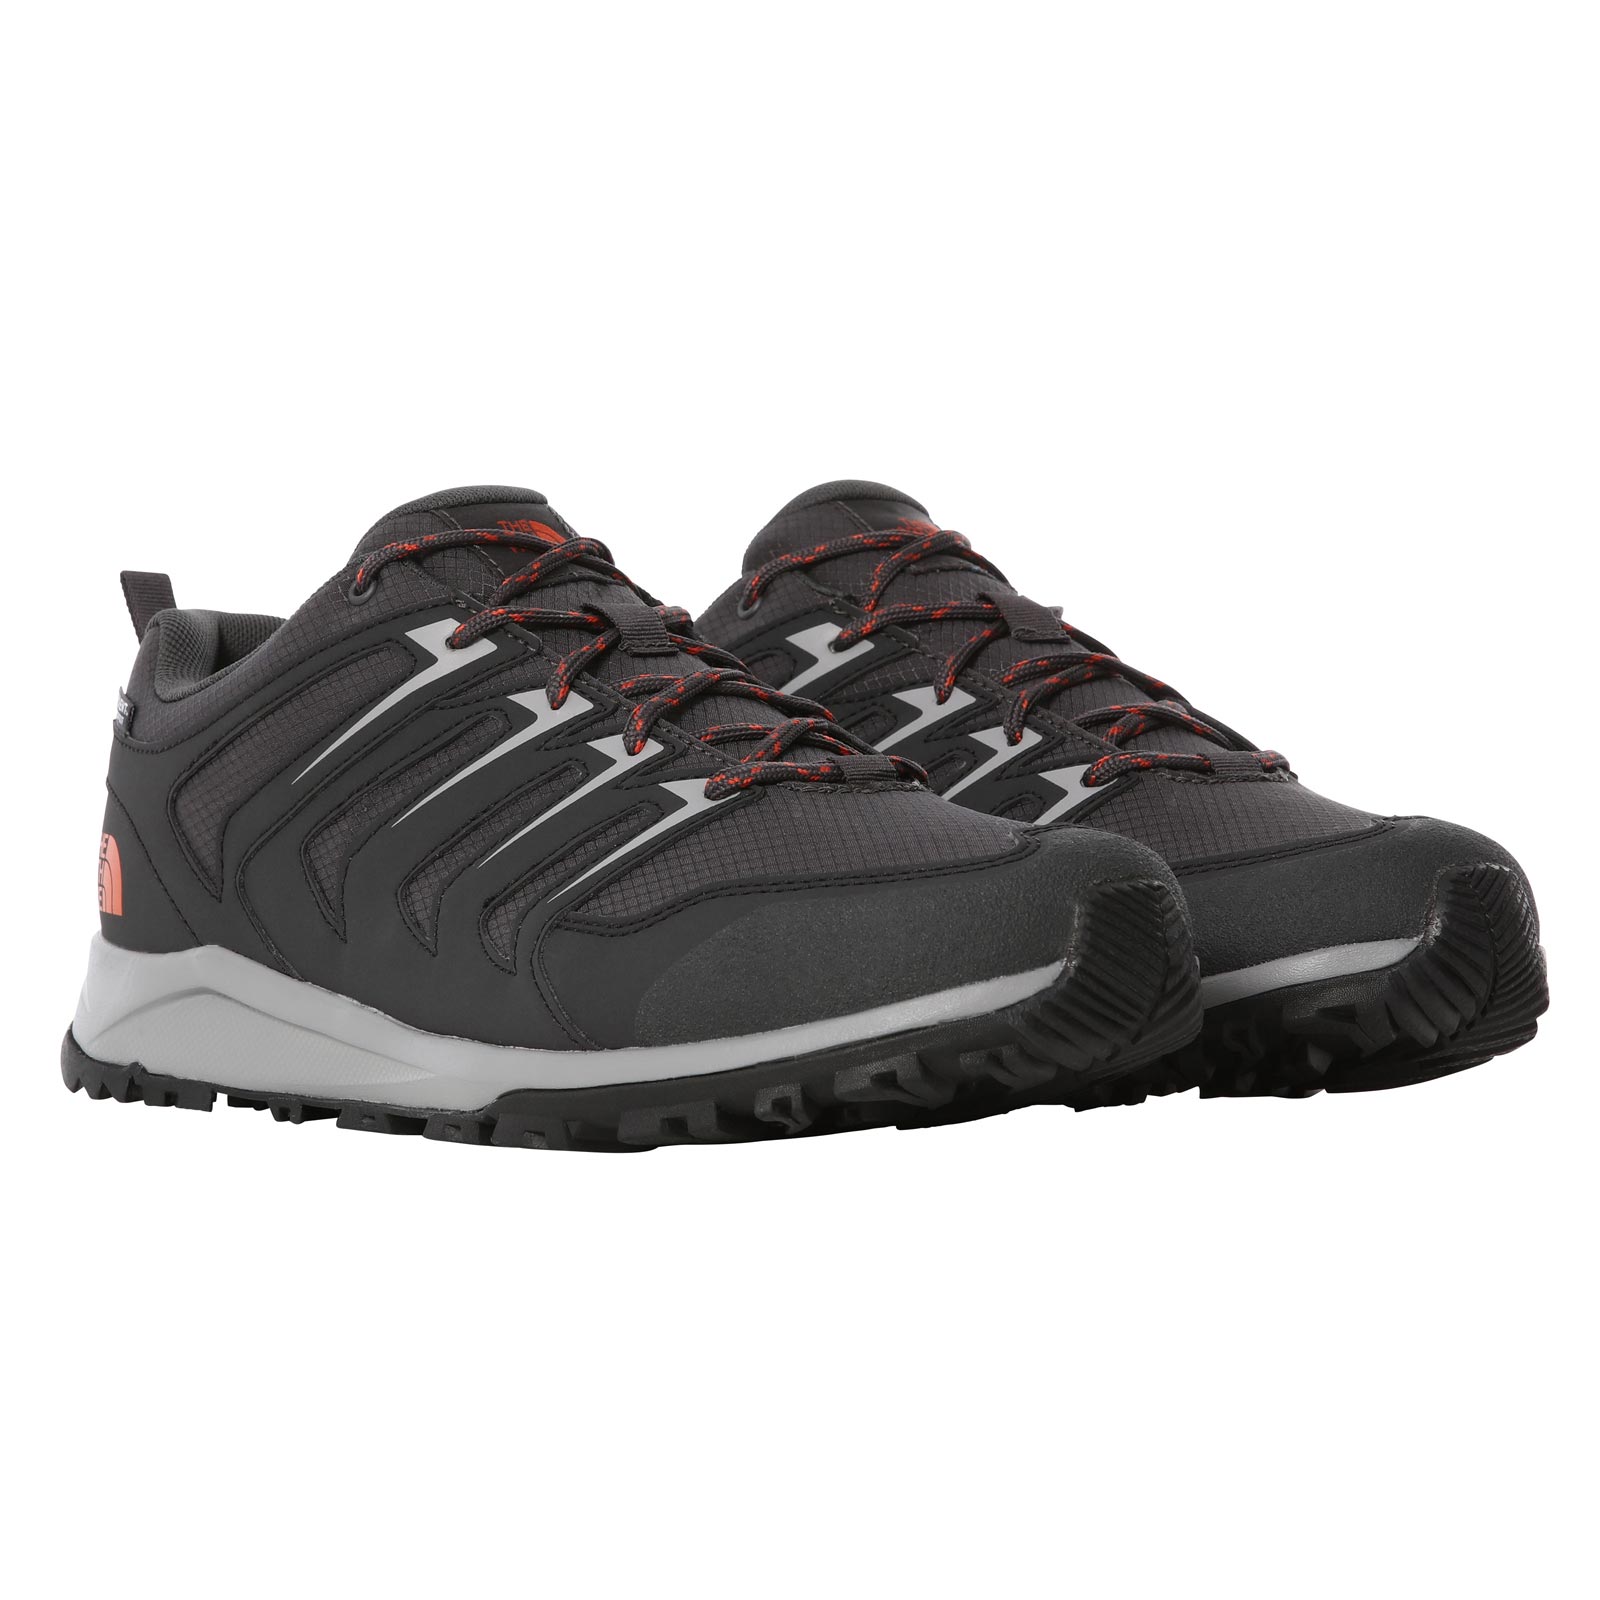 THE NORTH FACE VENTURE FASTHIKE II MENS HIKING SHOES